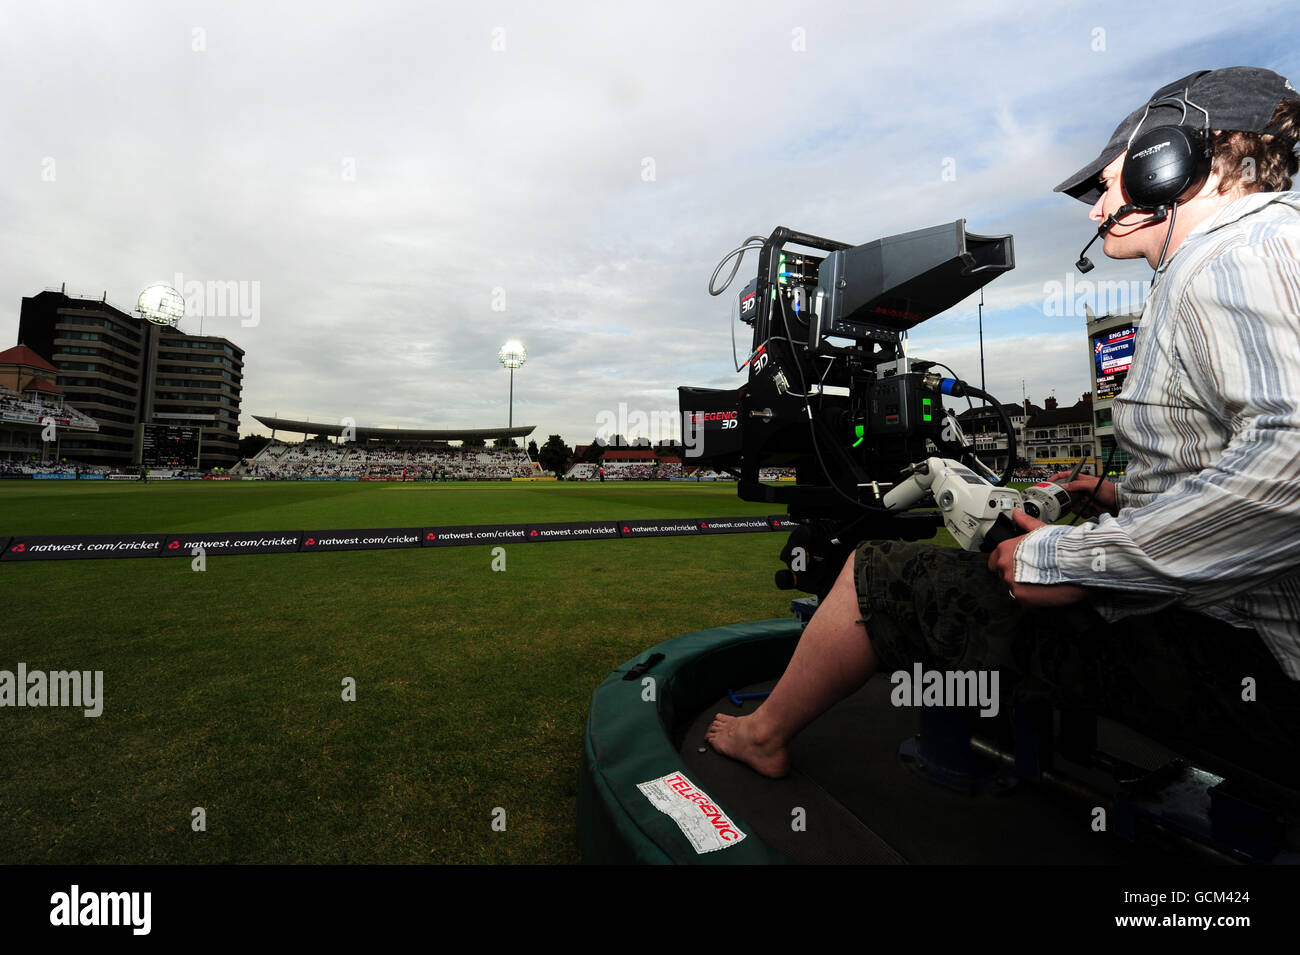 Cricket - NatWest Series - First One Day International - England v Bangladesh - Trent Bridge. Sky television cameras cover the game for 3D viewing Stock Photo